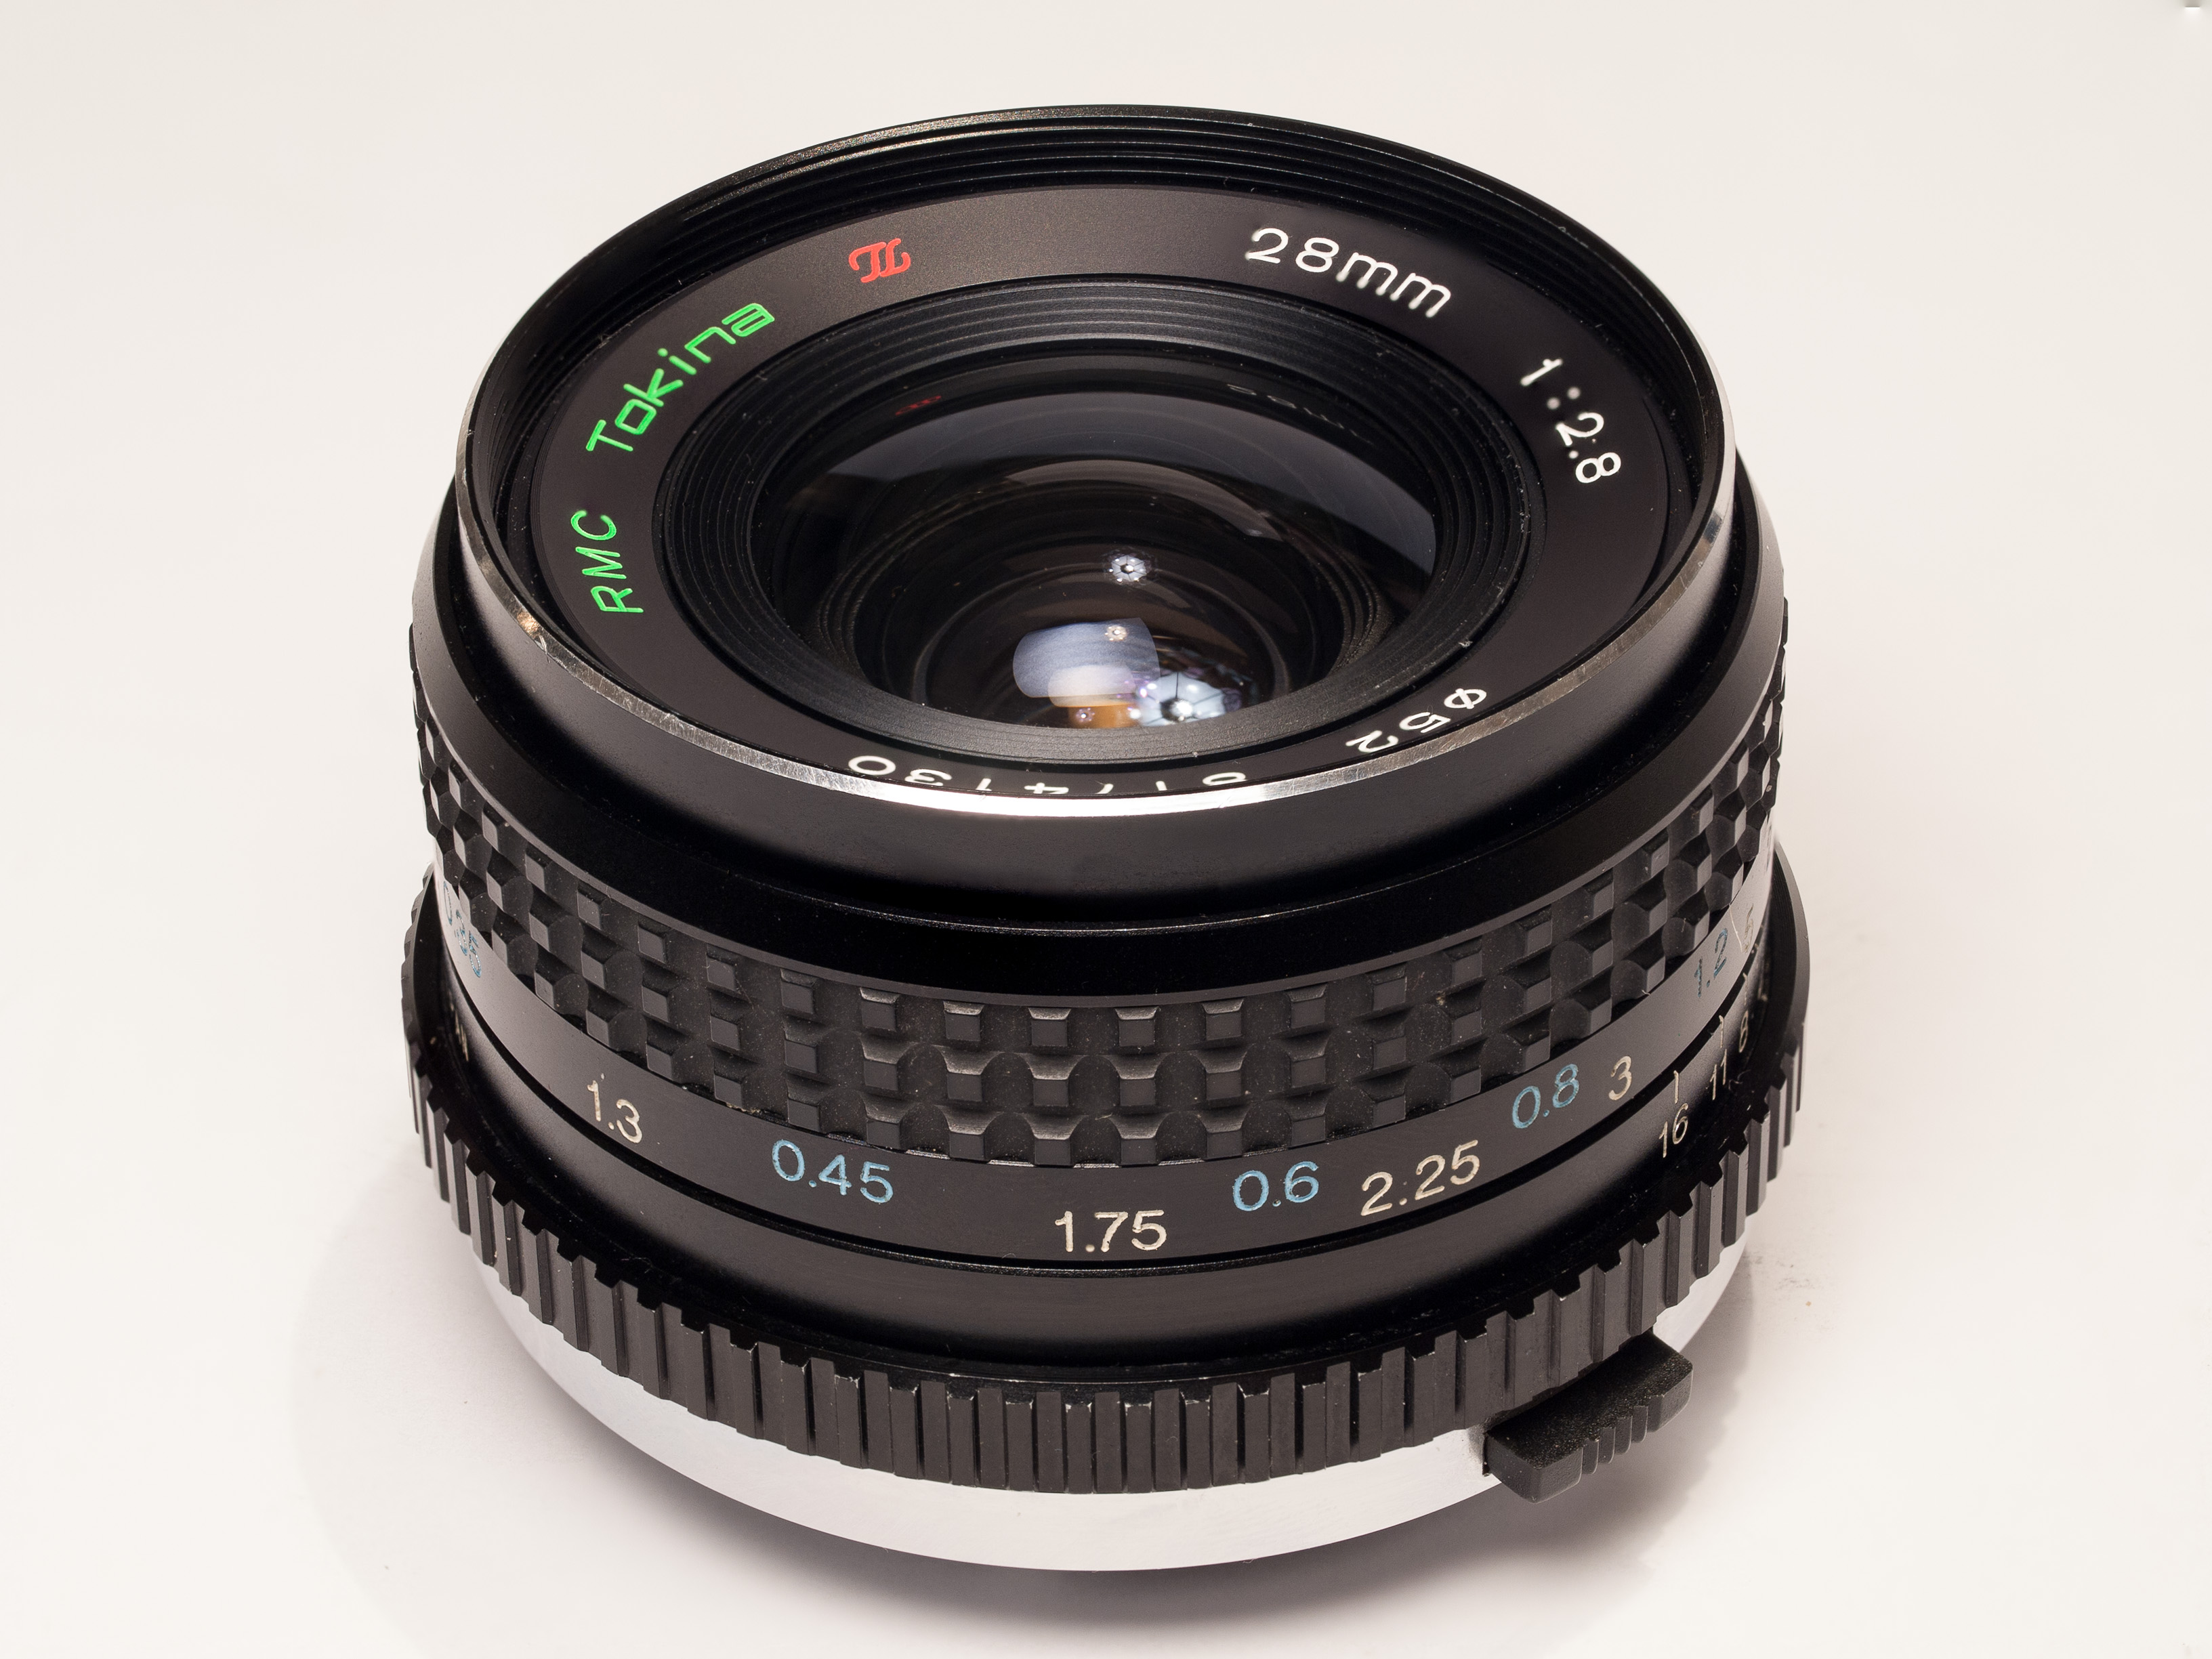 RMC Tokina 28mm lens for Olympus OM